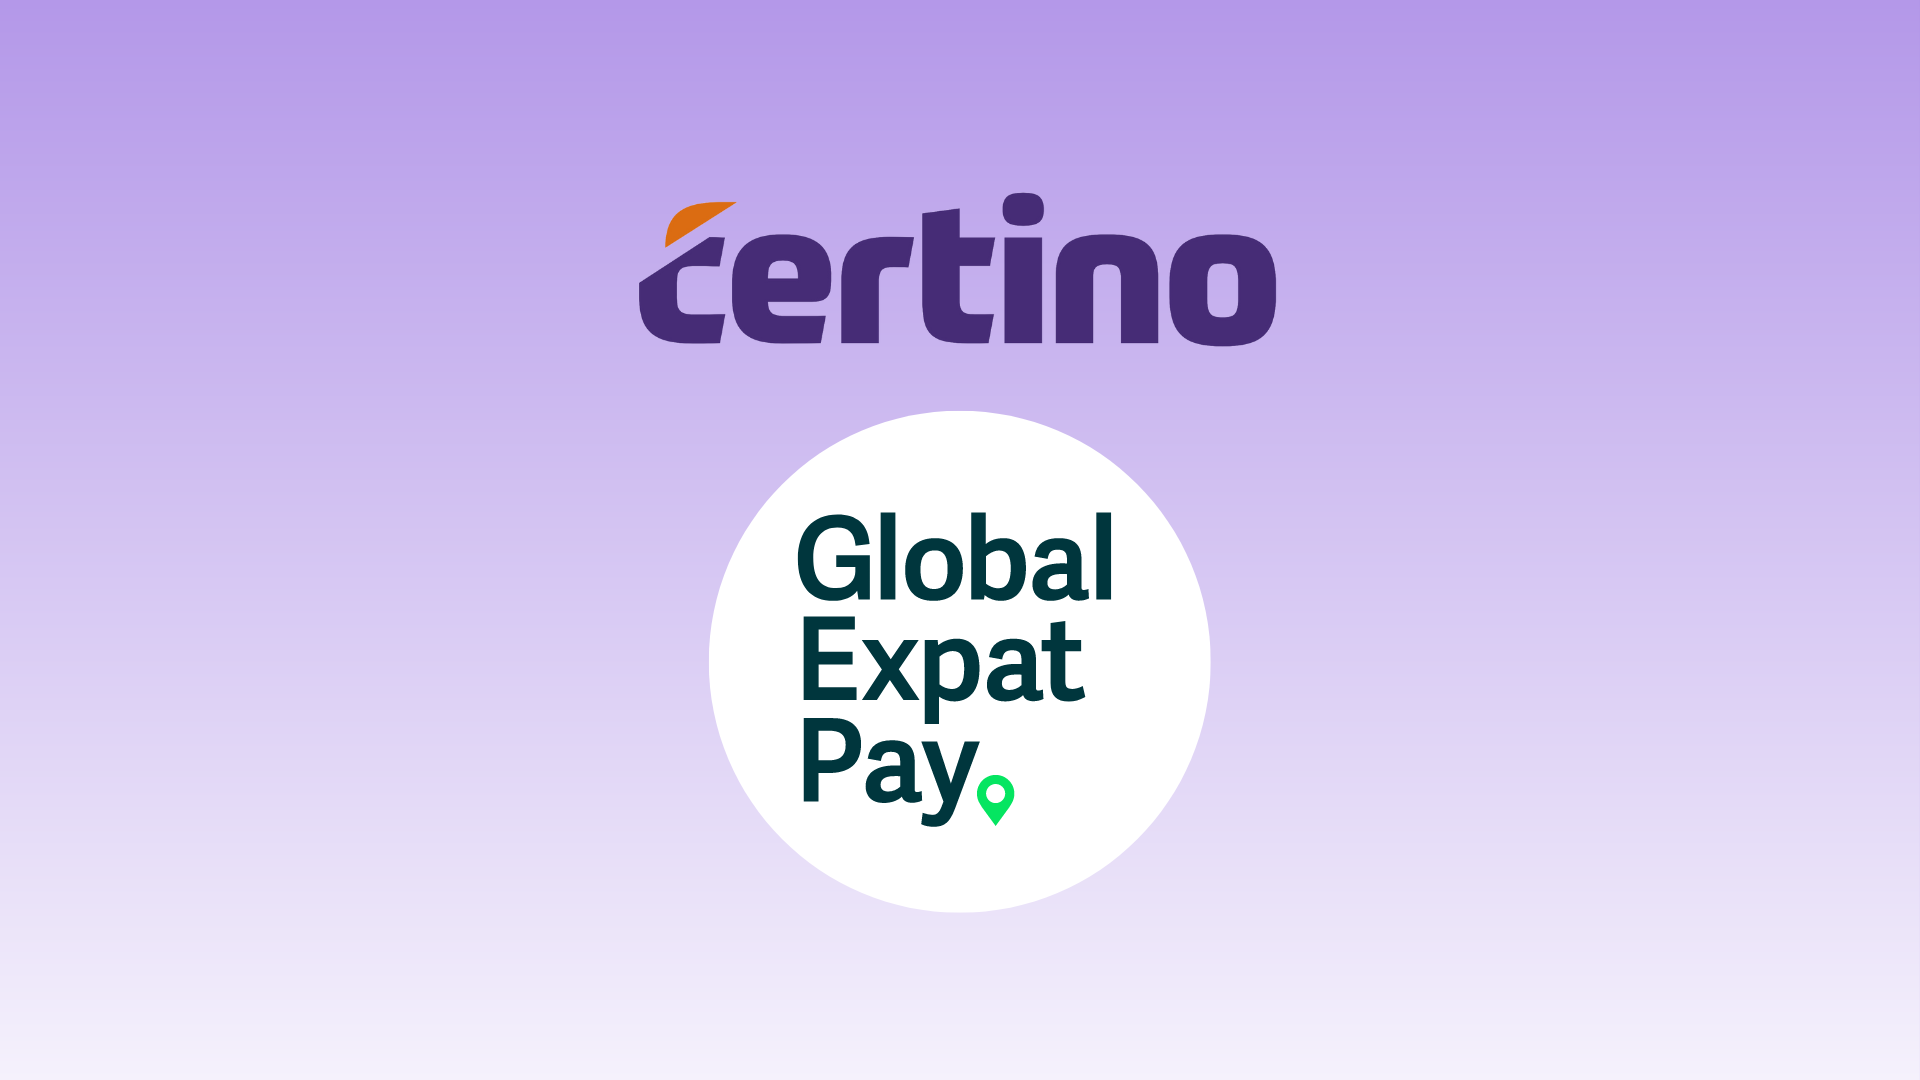 Global Expat Pay partners with Certino to provide shadow payroll calculations to clients